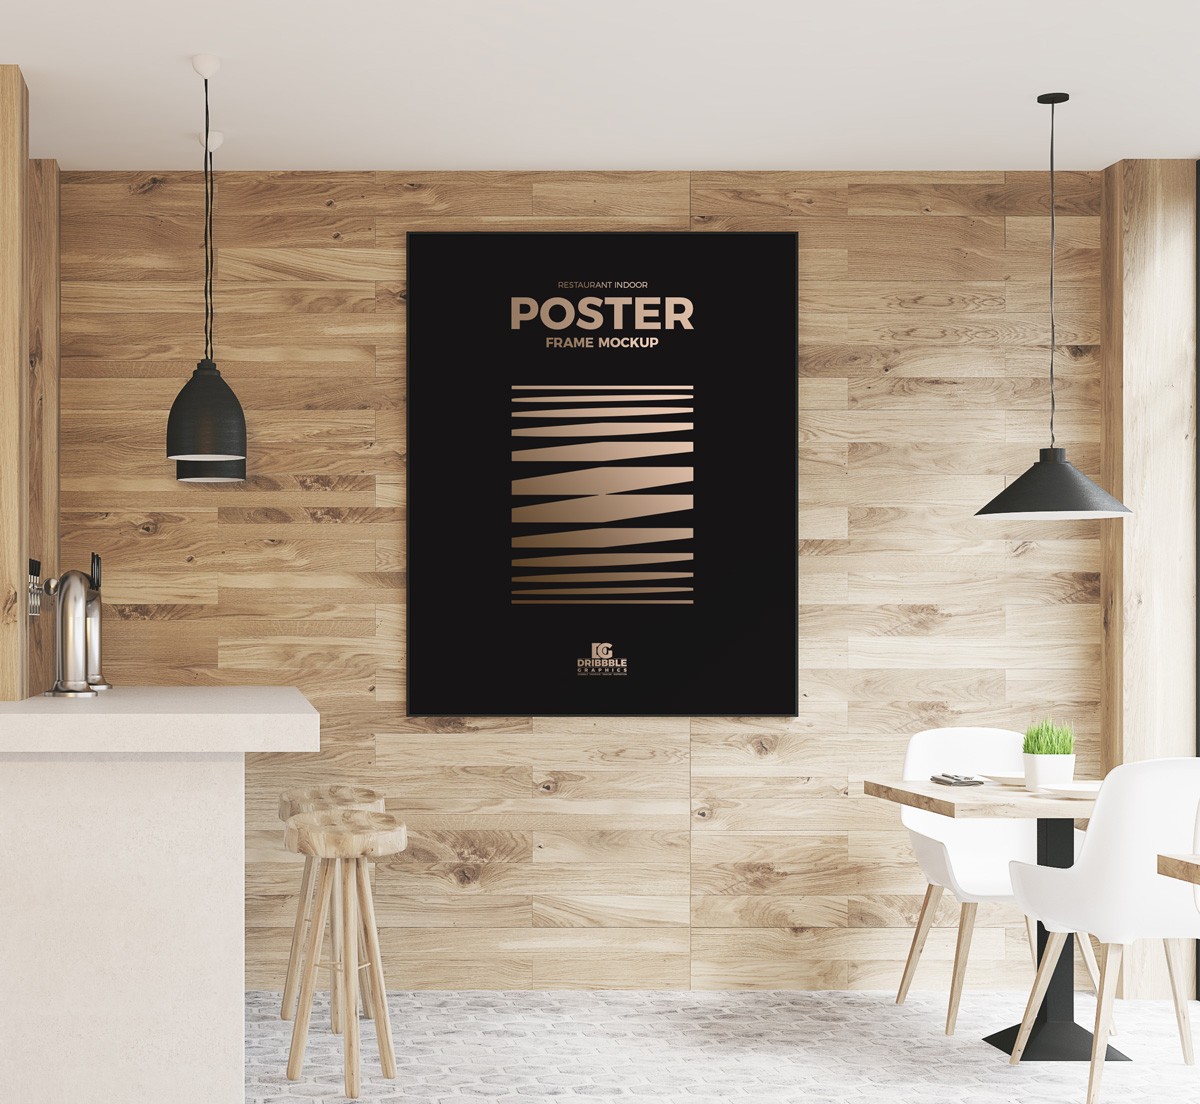 Download Free Restaurant Indoor Wooden Wall Poster Frame Mockup Psd Dribbble Graphics PSD Mockup Templates